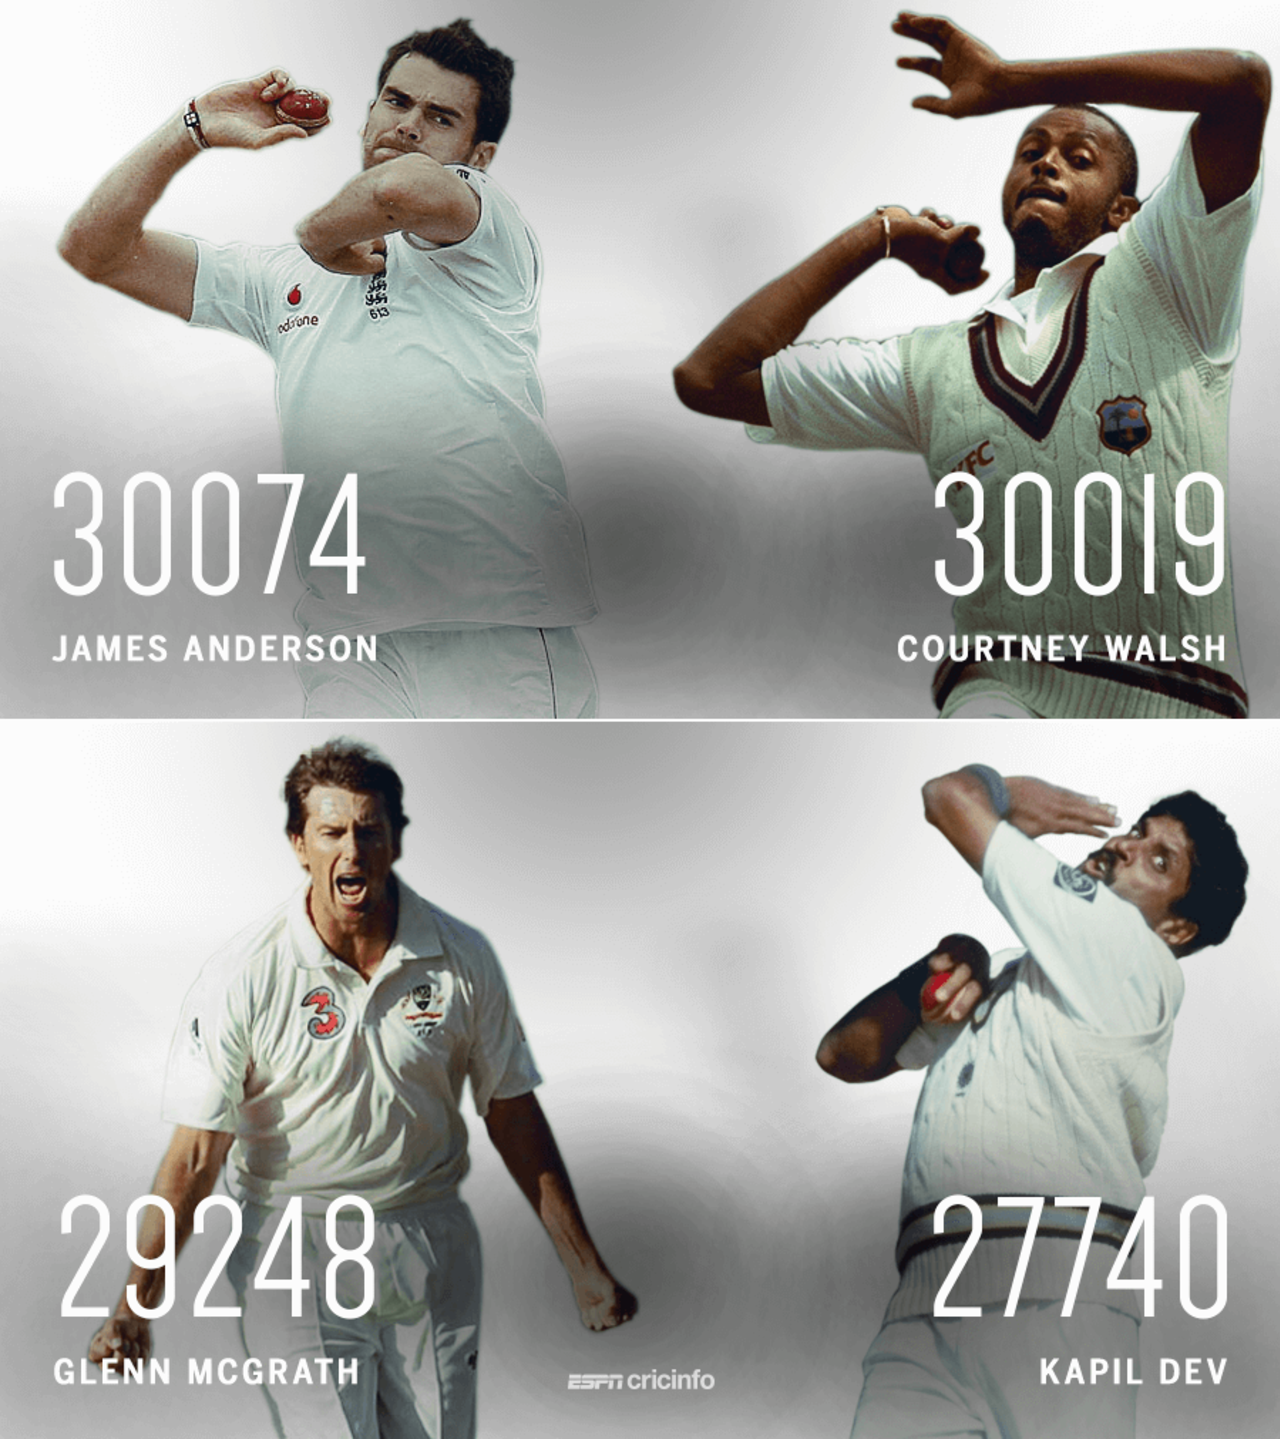 Among pace bowlers, James Anderson has delivered the most balls in Test cricket 